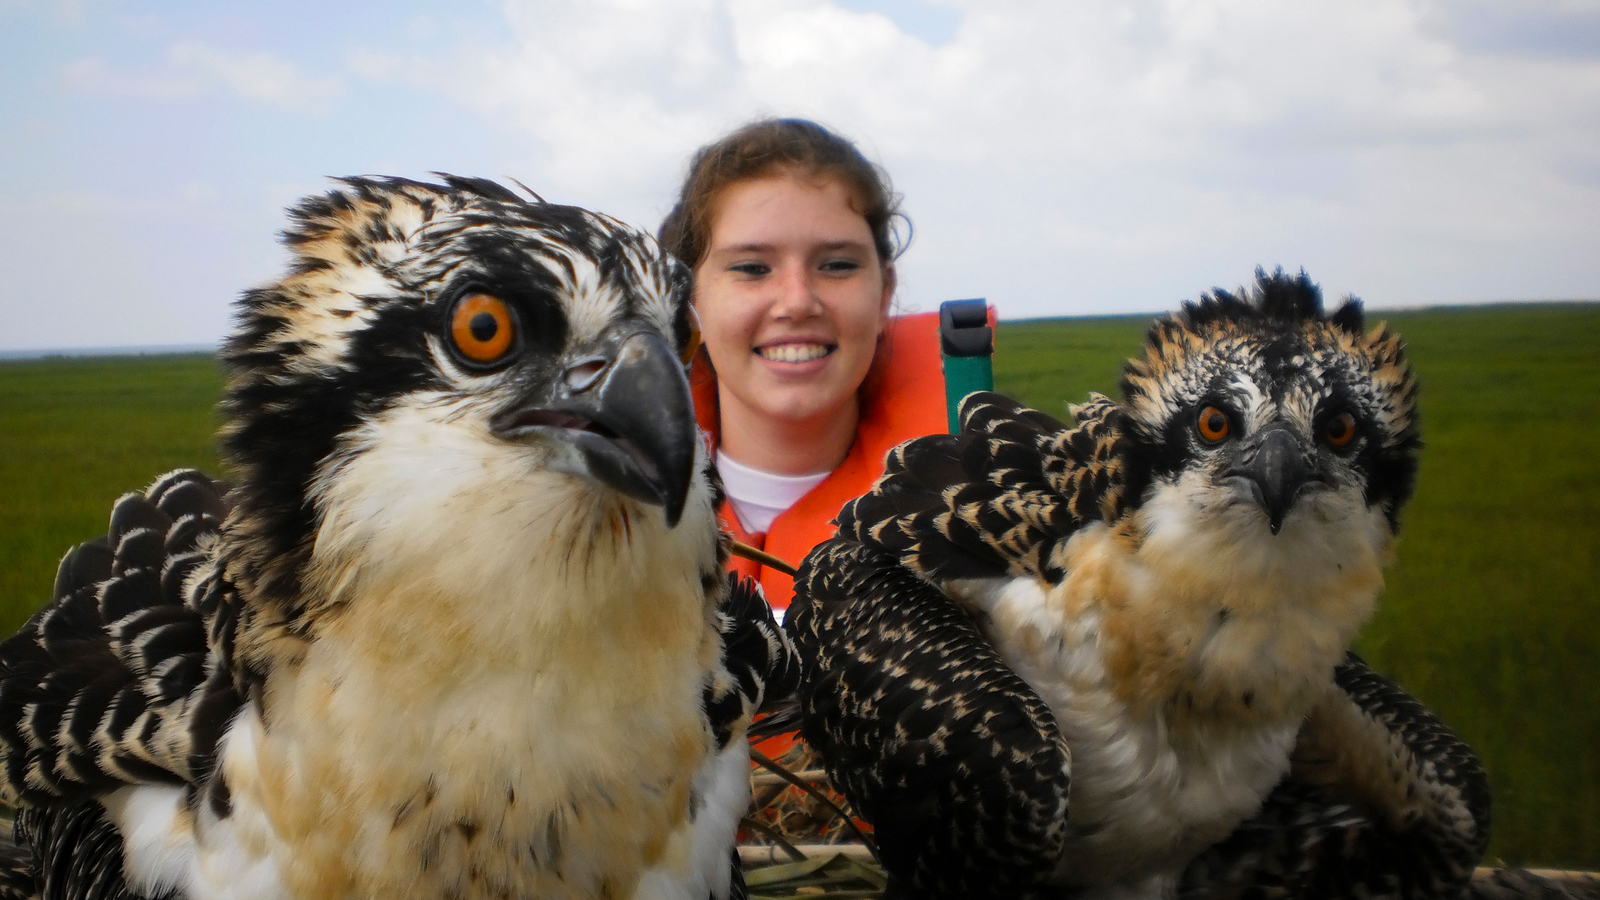 A LEAF intern examines fledgling osprey. Photo © The Nature Conservancy